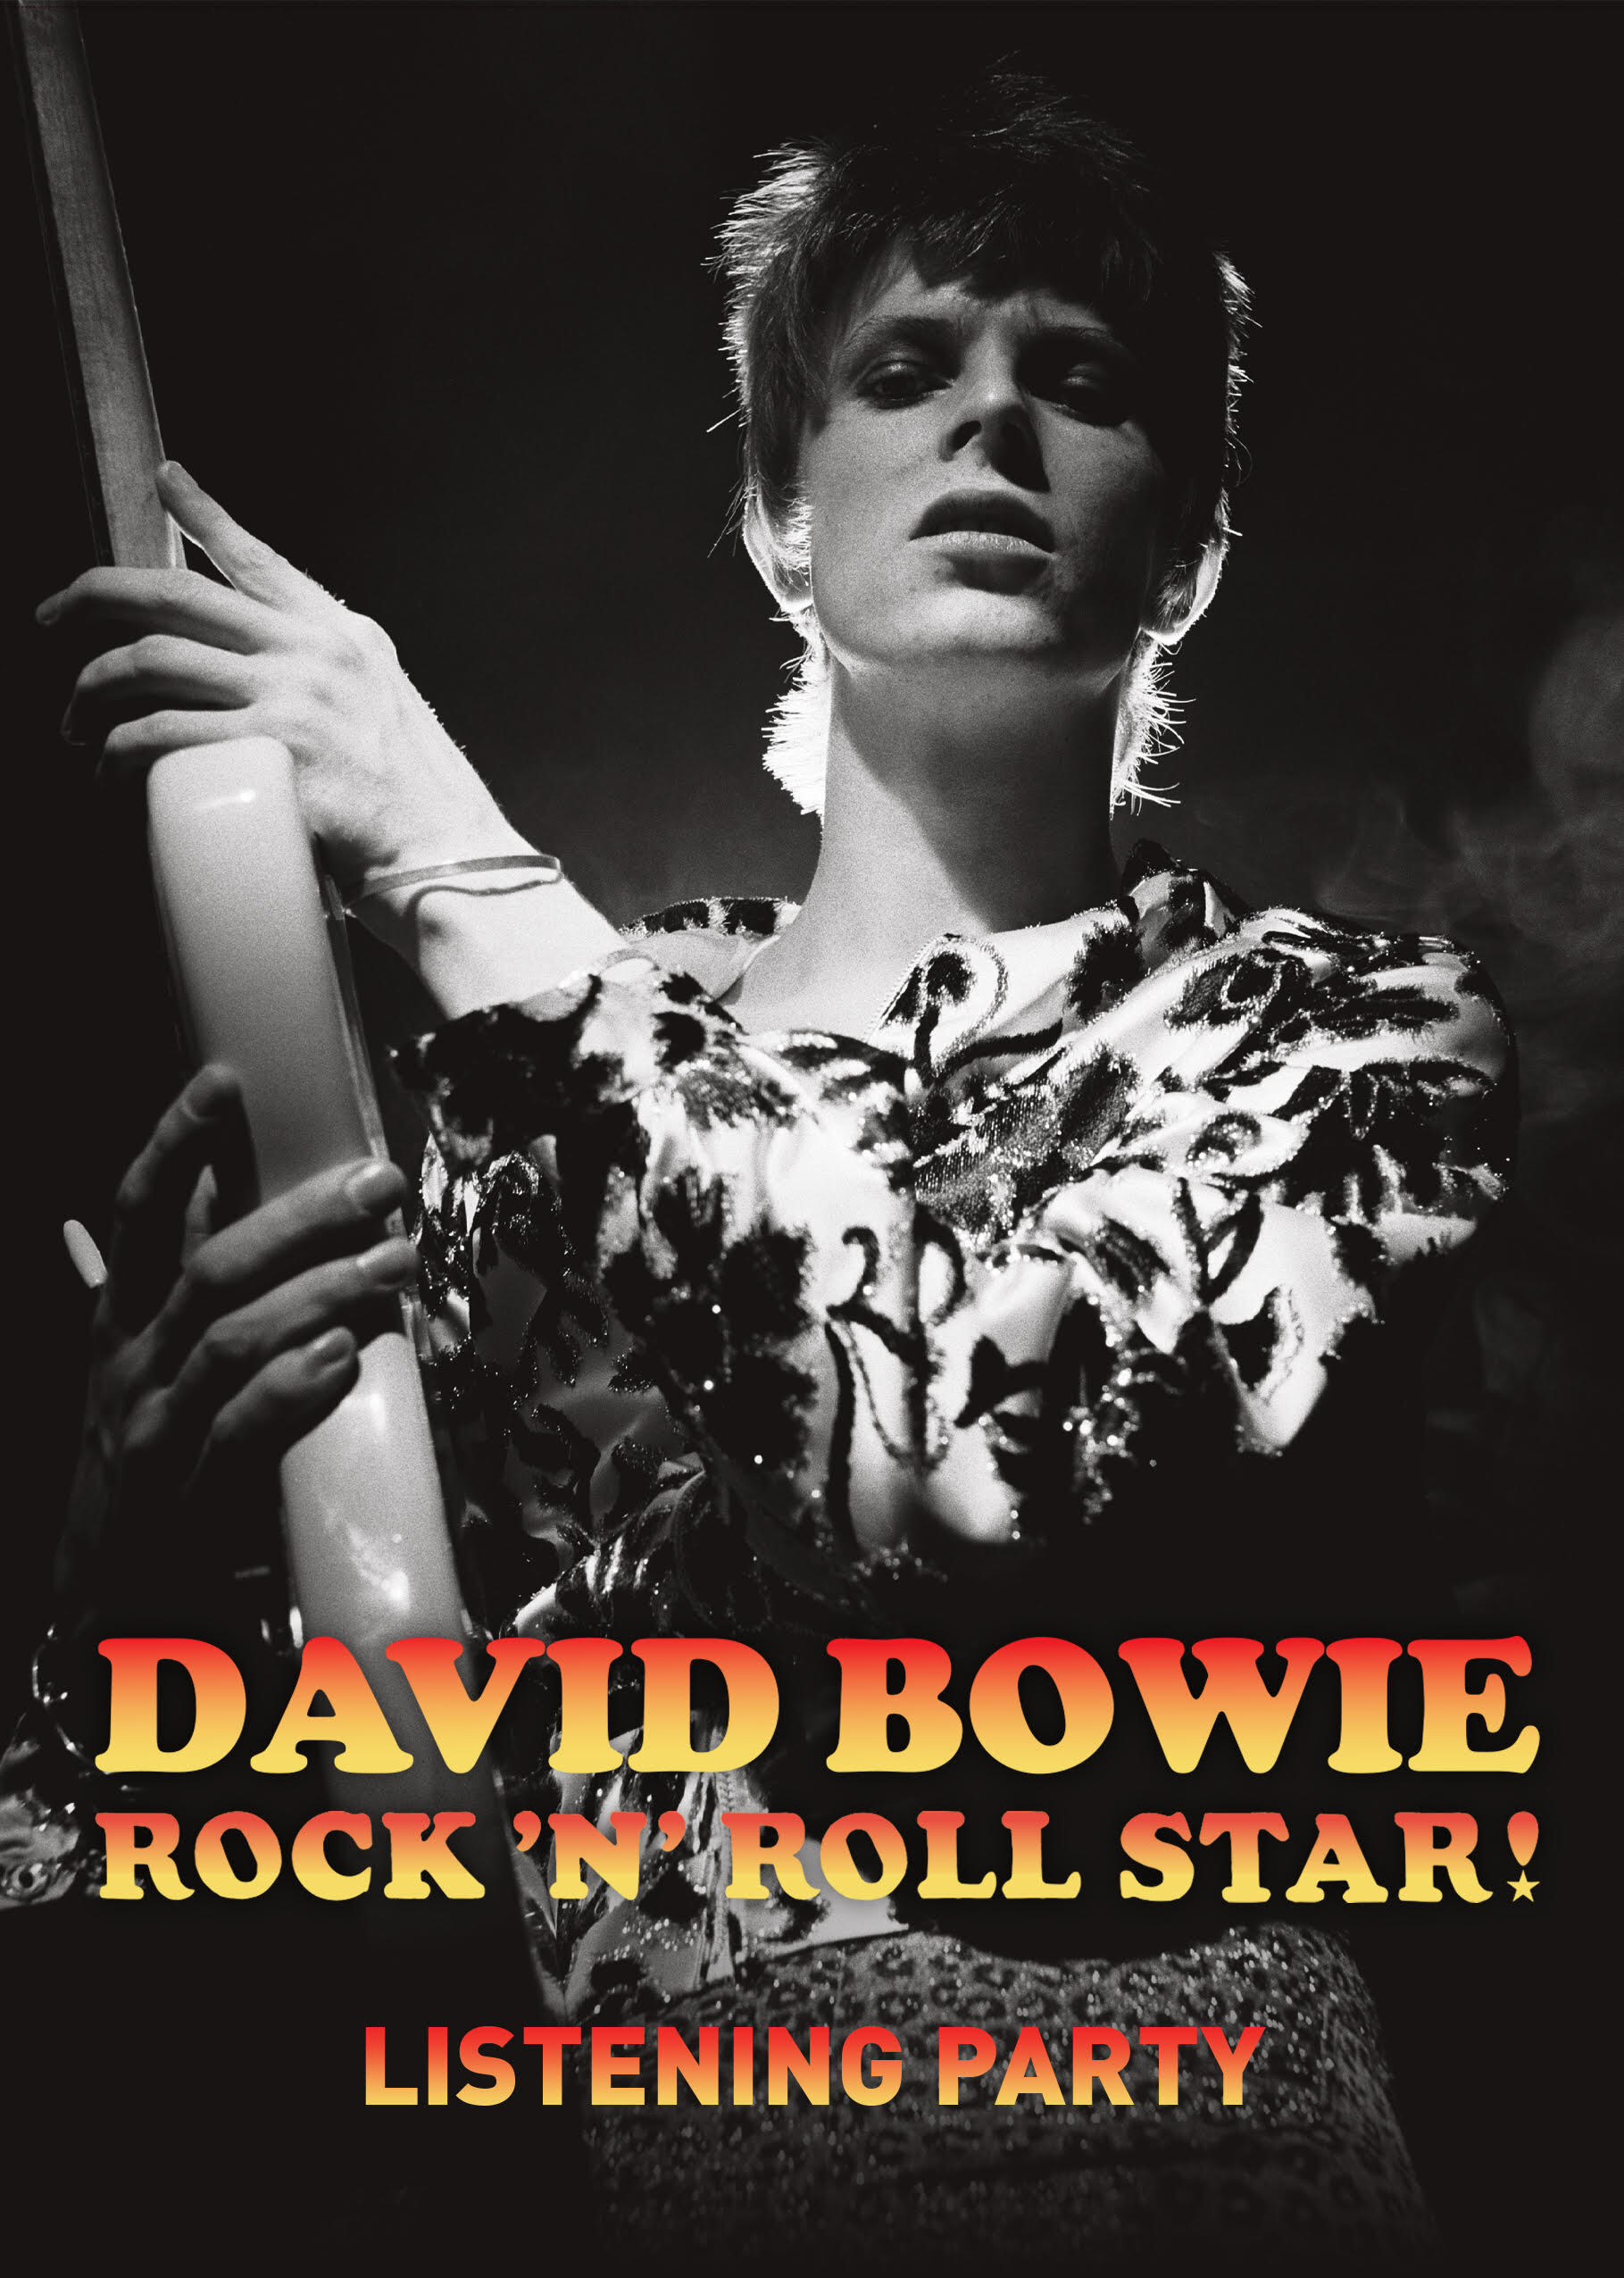 Bowie Rock N Roll Star Party 6/11/24 at 5:30pm